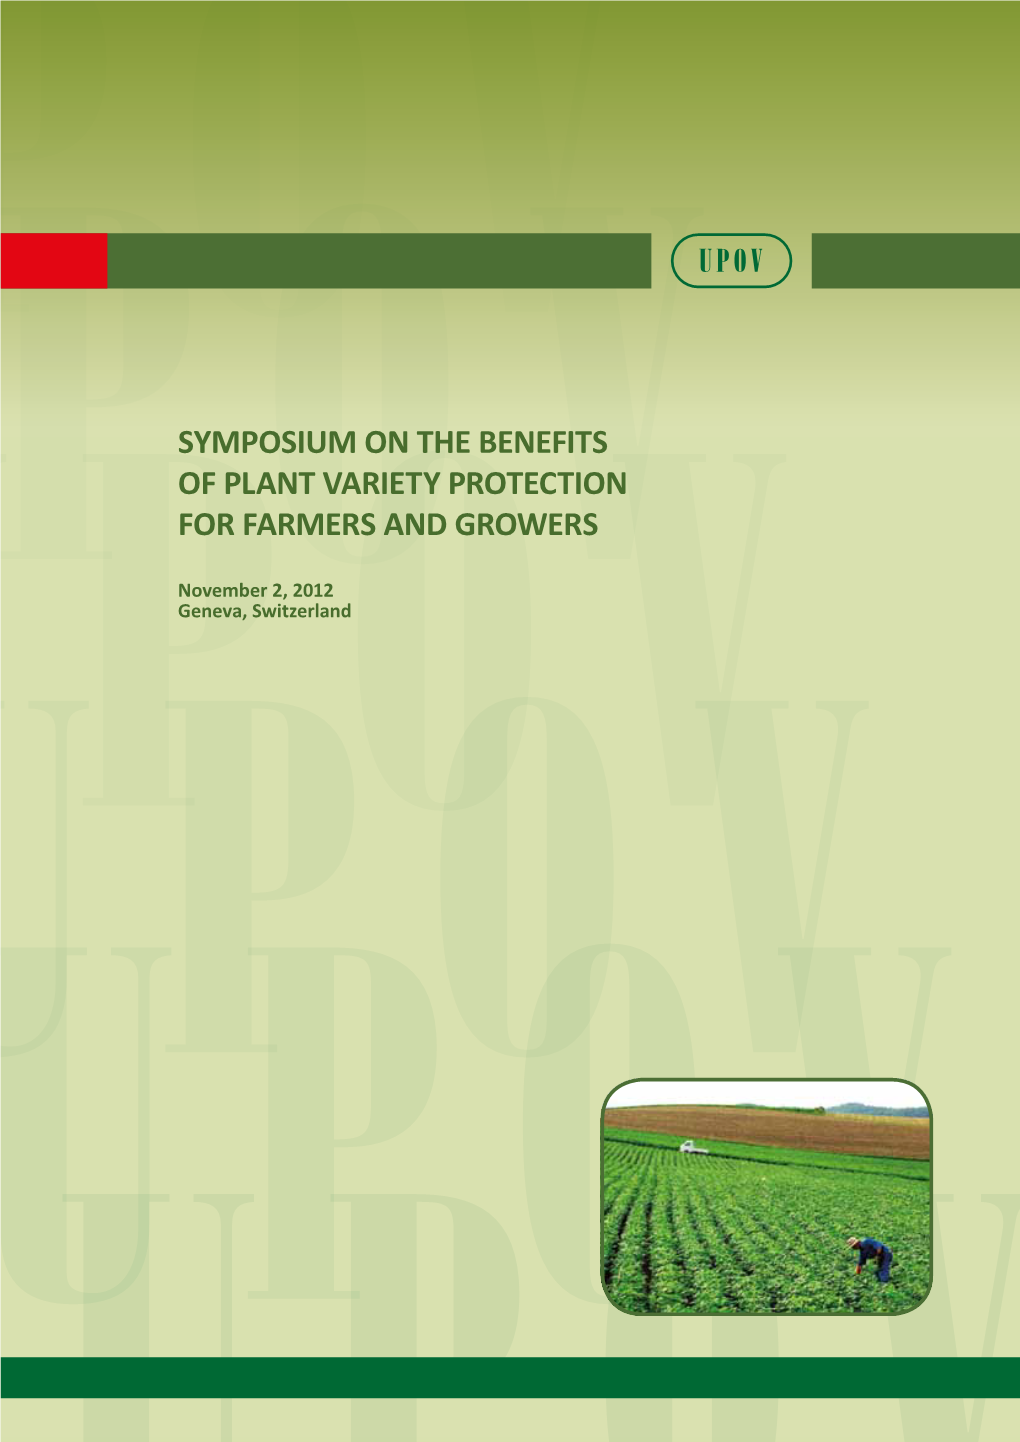 Symposium on the Benefits of Plant Variety Protection for Farmers and Growers